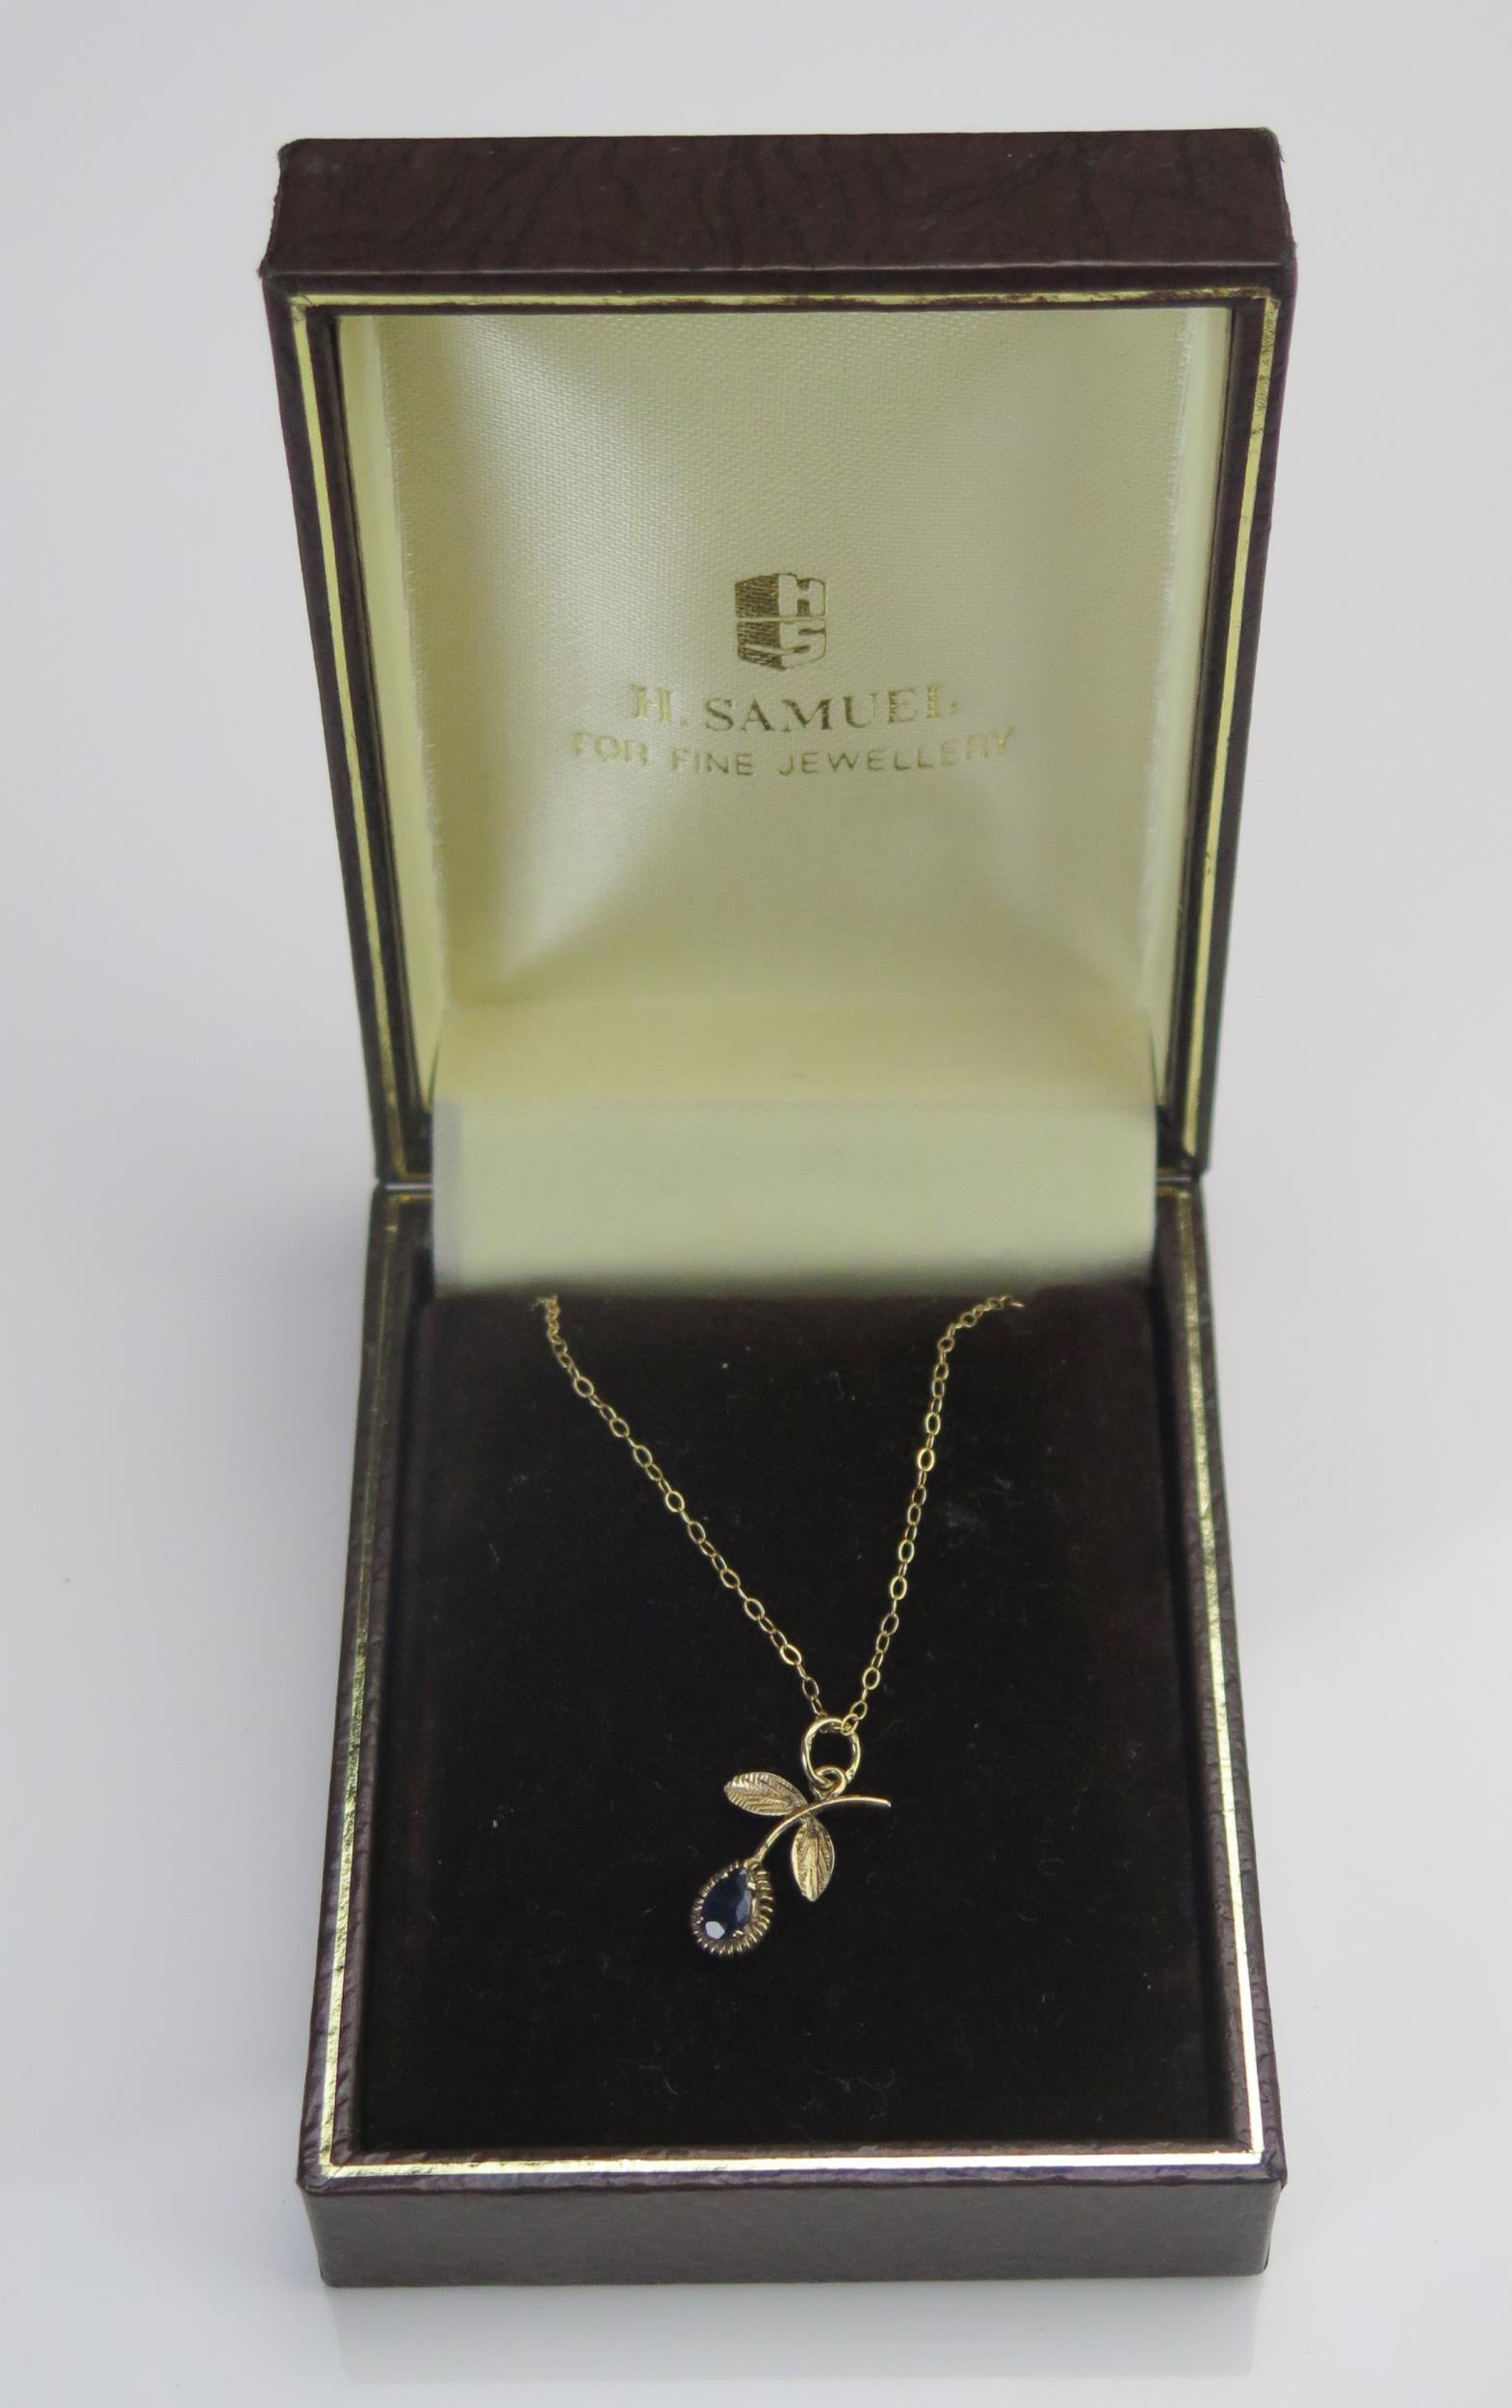 A 9ct Gold and Sapphire Pendant on chain, 18.7mm drop, 9" (23cm), 1.07g), H. Samuel box